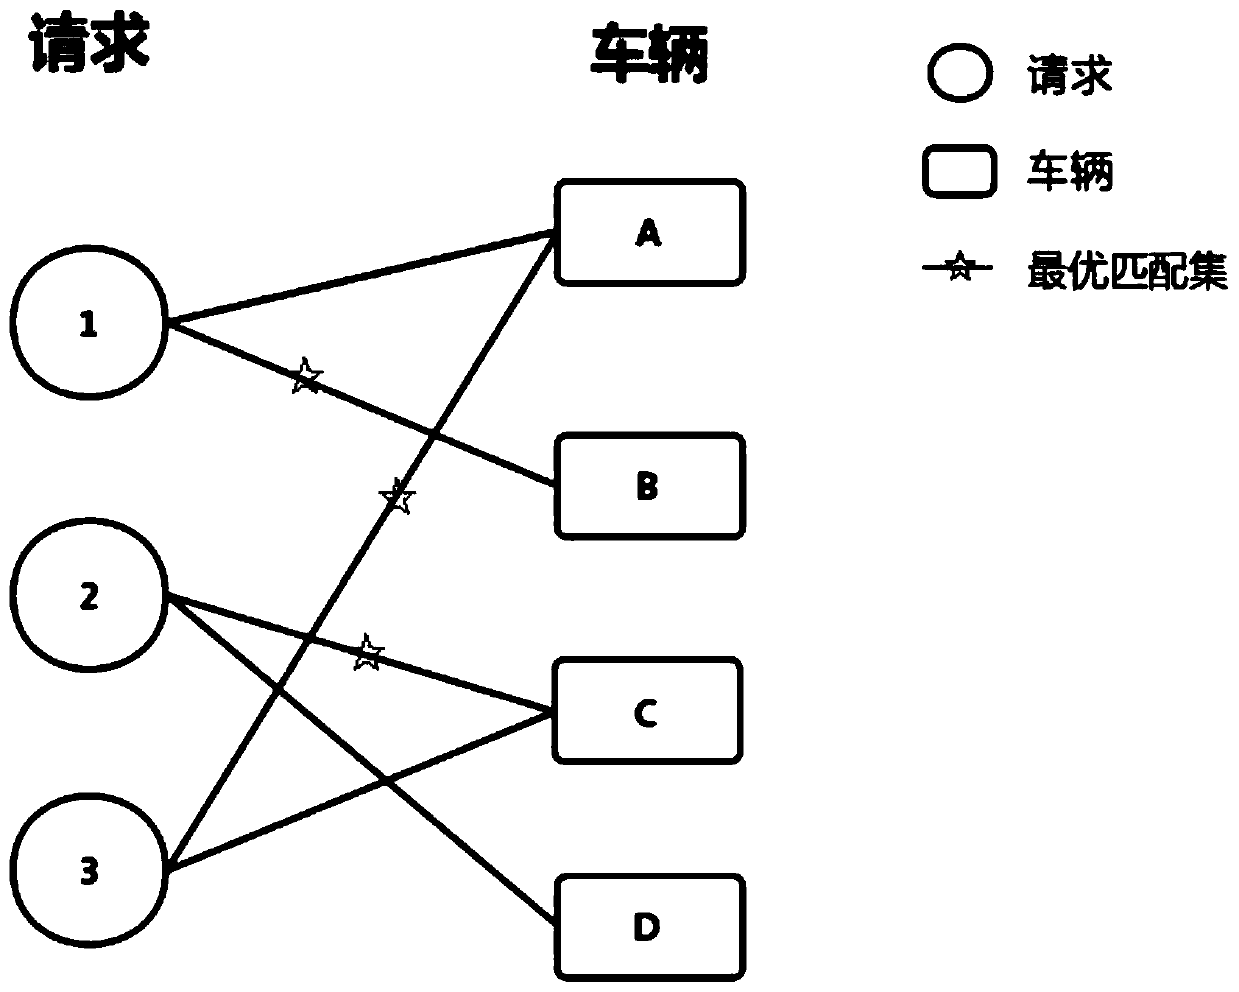 Bipartite graph-based shared network driver and passenger matching method